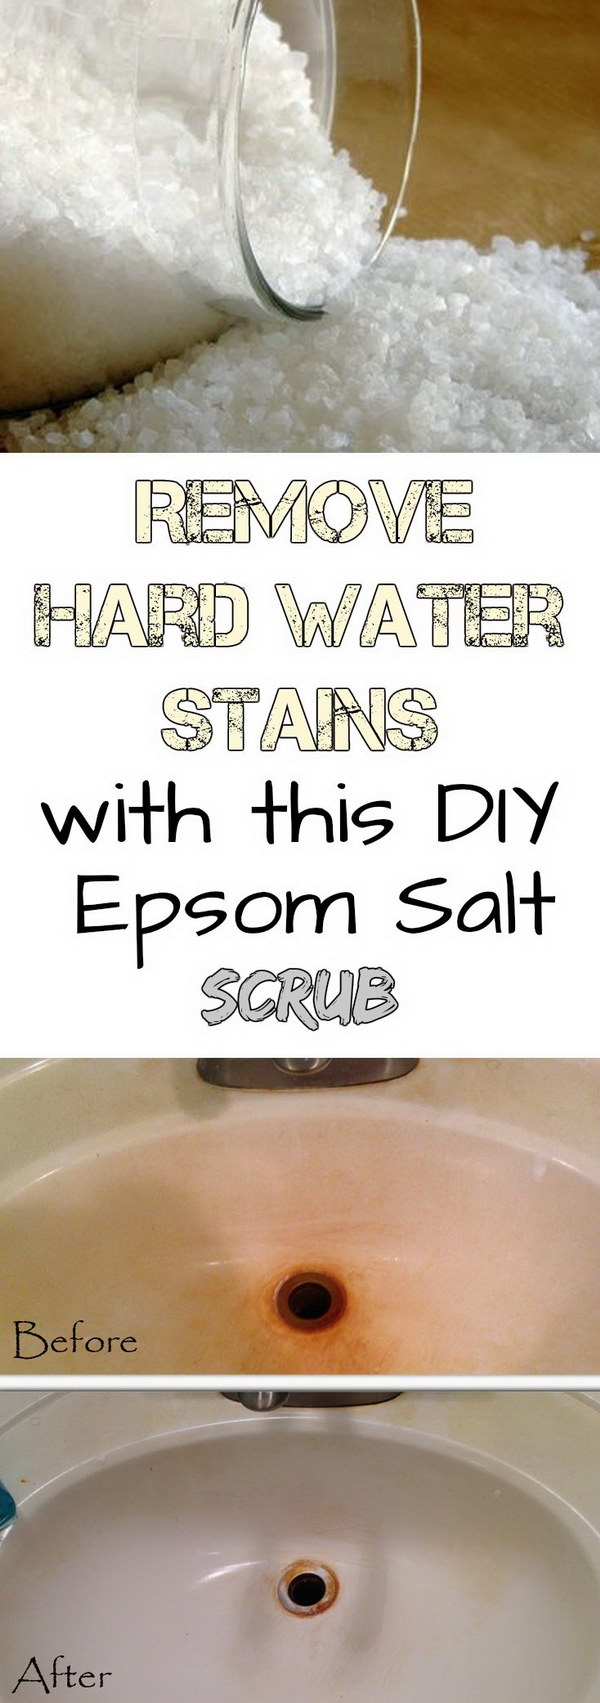 Remove hard water stains with this DIY Epsom Salt Scrub. 